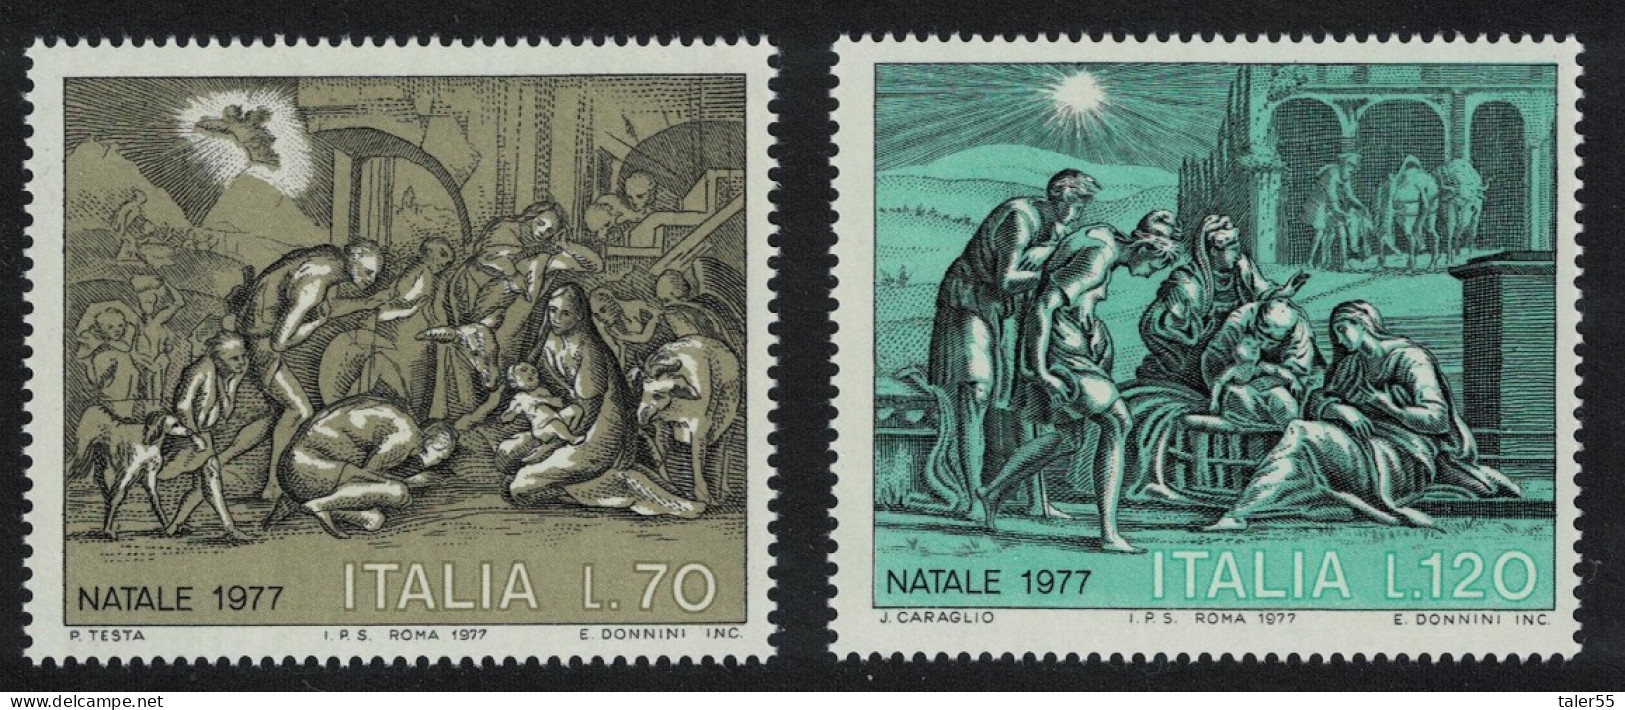 Italy 'Adoration Of The Shepherds' By P Testa Christmas 2v 1977 MNH SG#1539-1549 - 1971-80: Mint/hinged